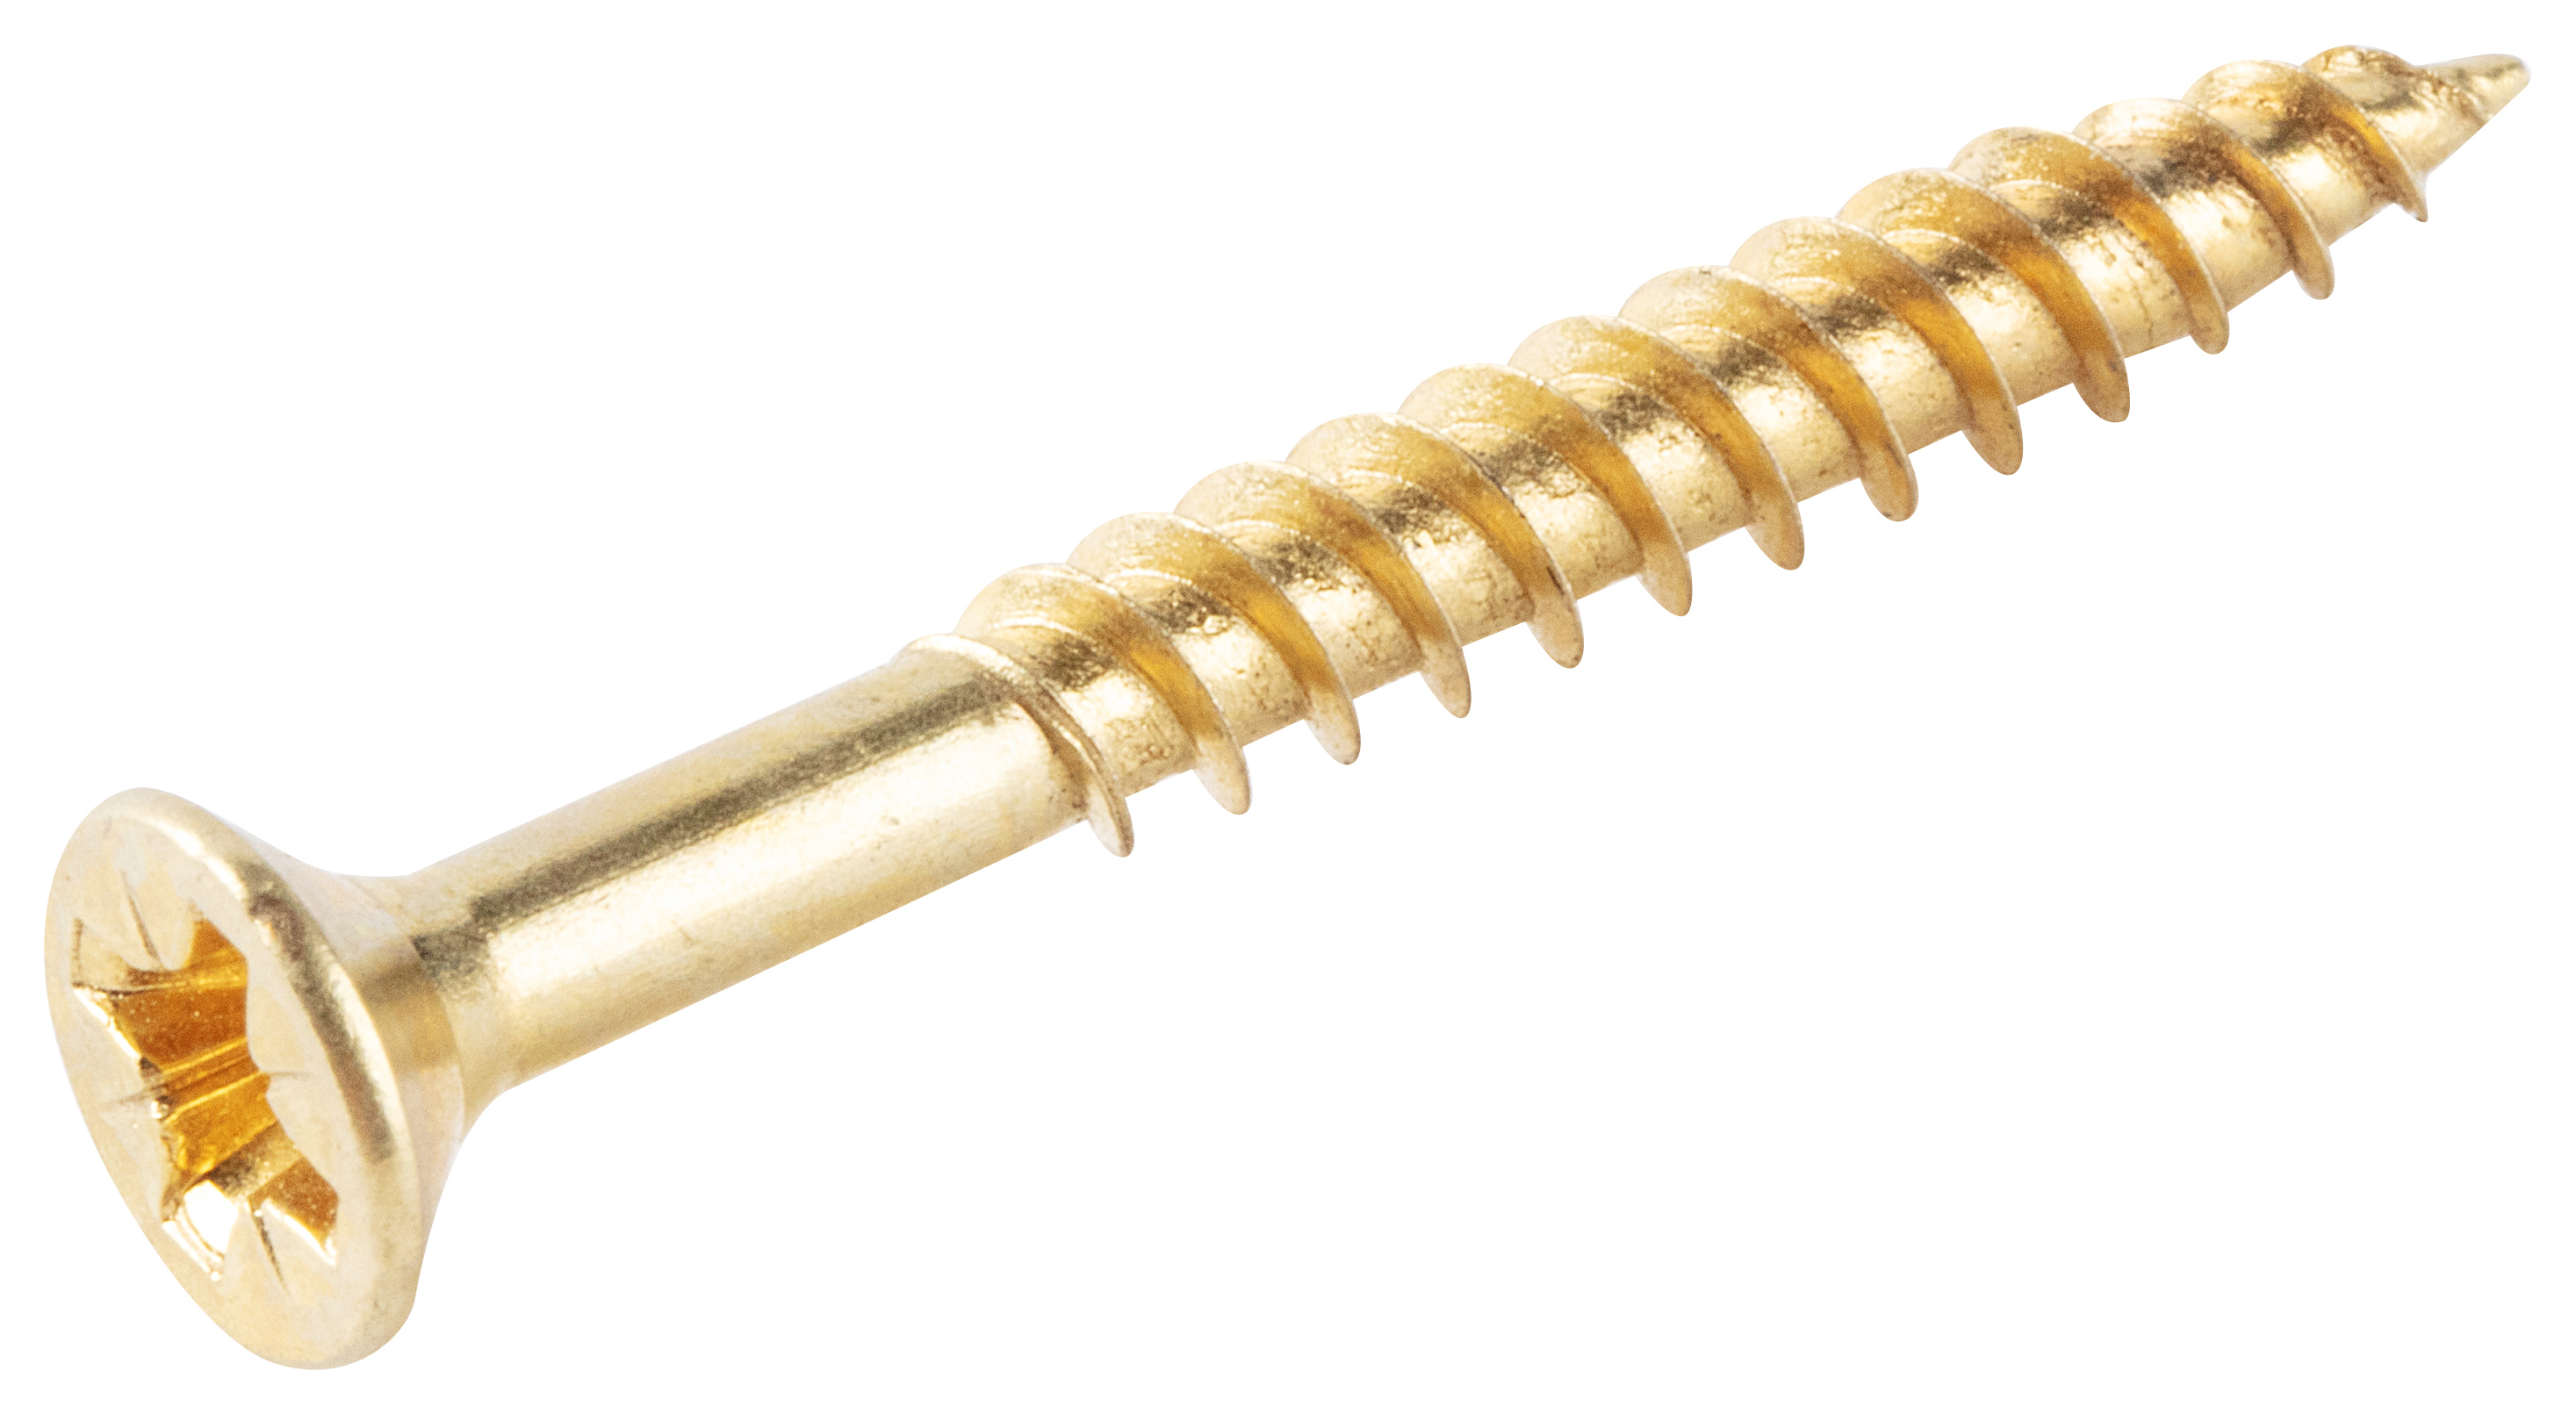 Wickes Brass Plated Wood Screws - 3.5 x 30mm - Pack of 50